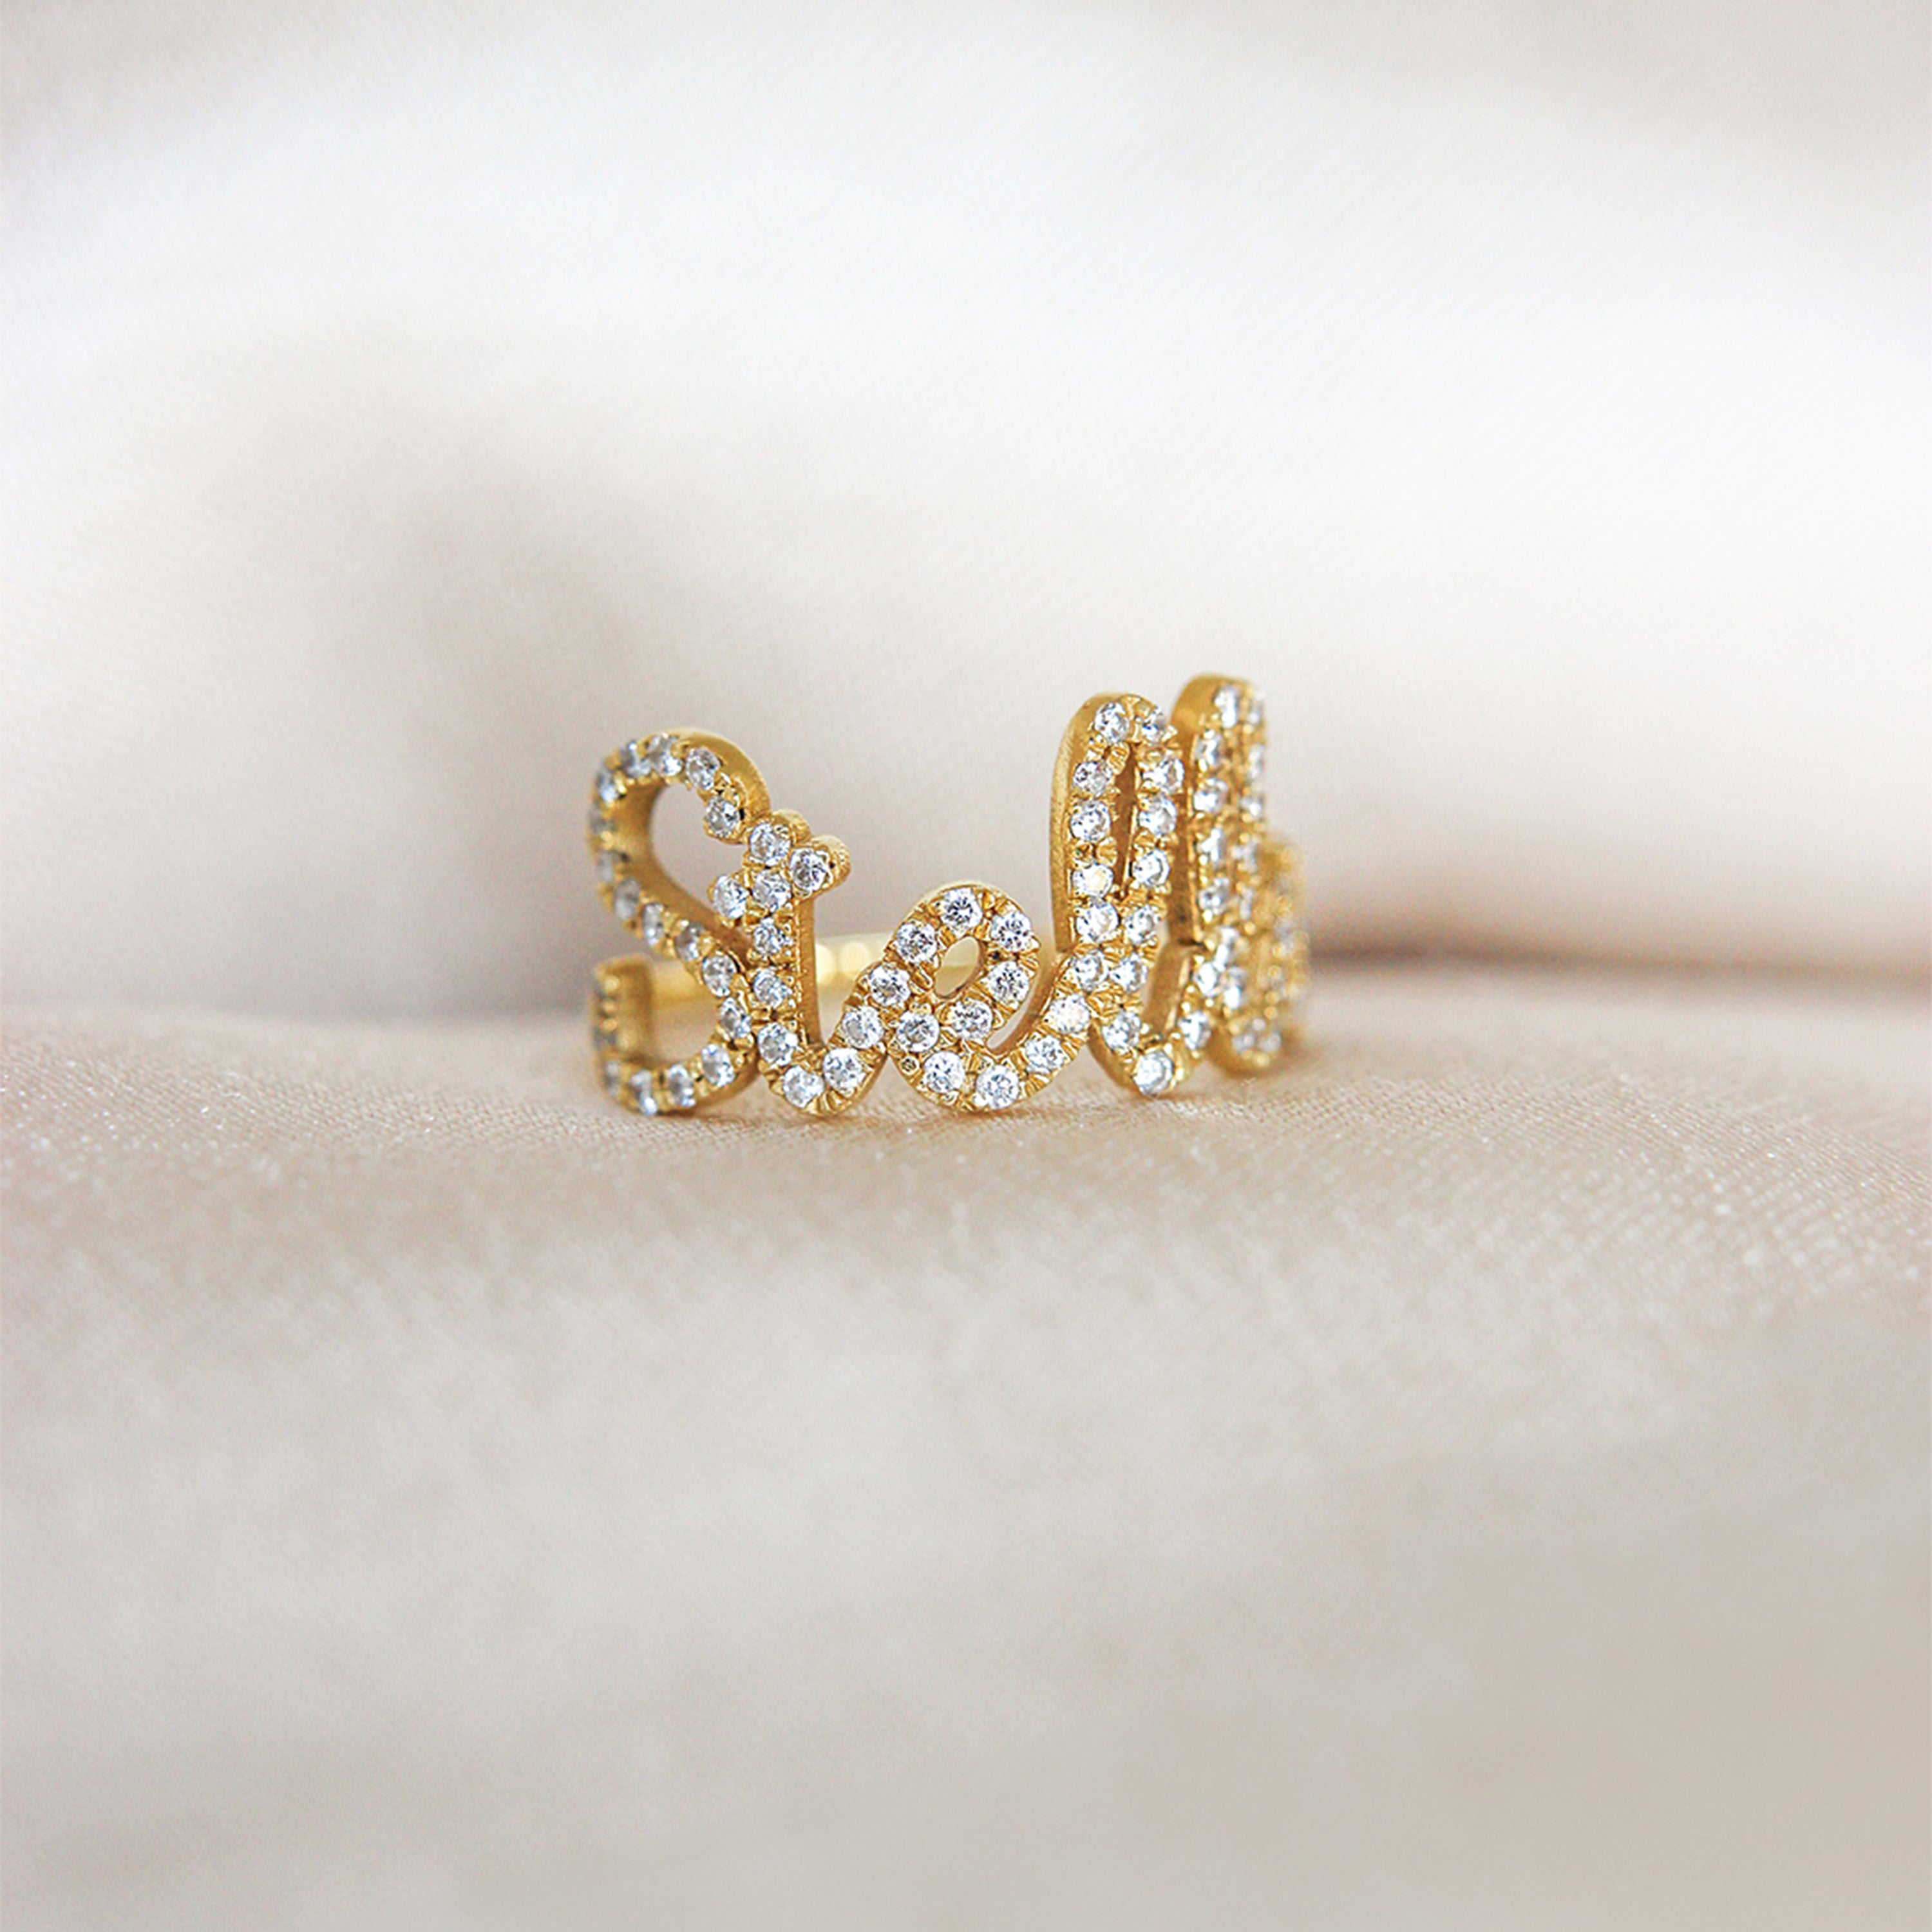 Rings - Customizable ring with name and Lab Grown Diamonds - ORO18KT - 8 | Rue des Mille